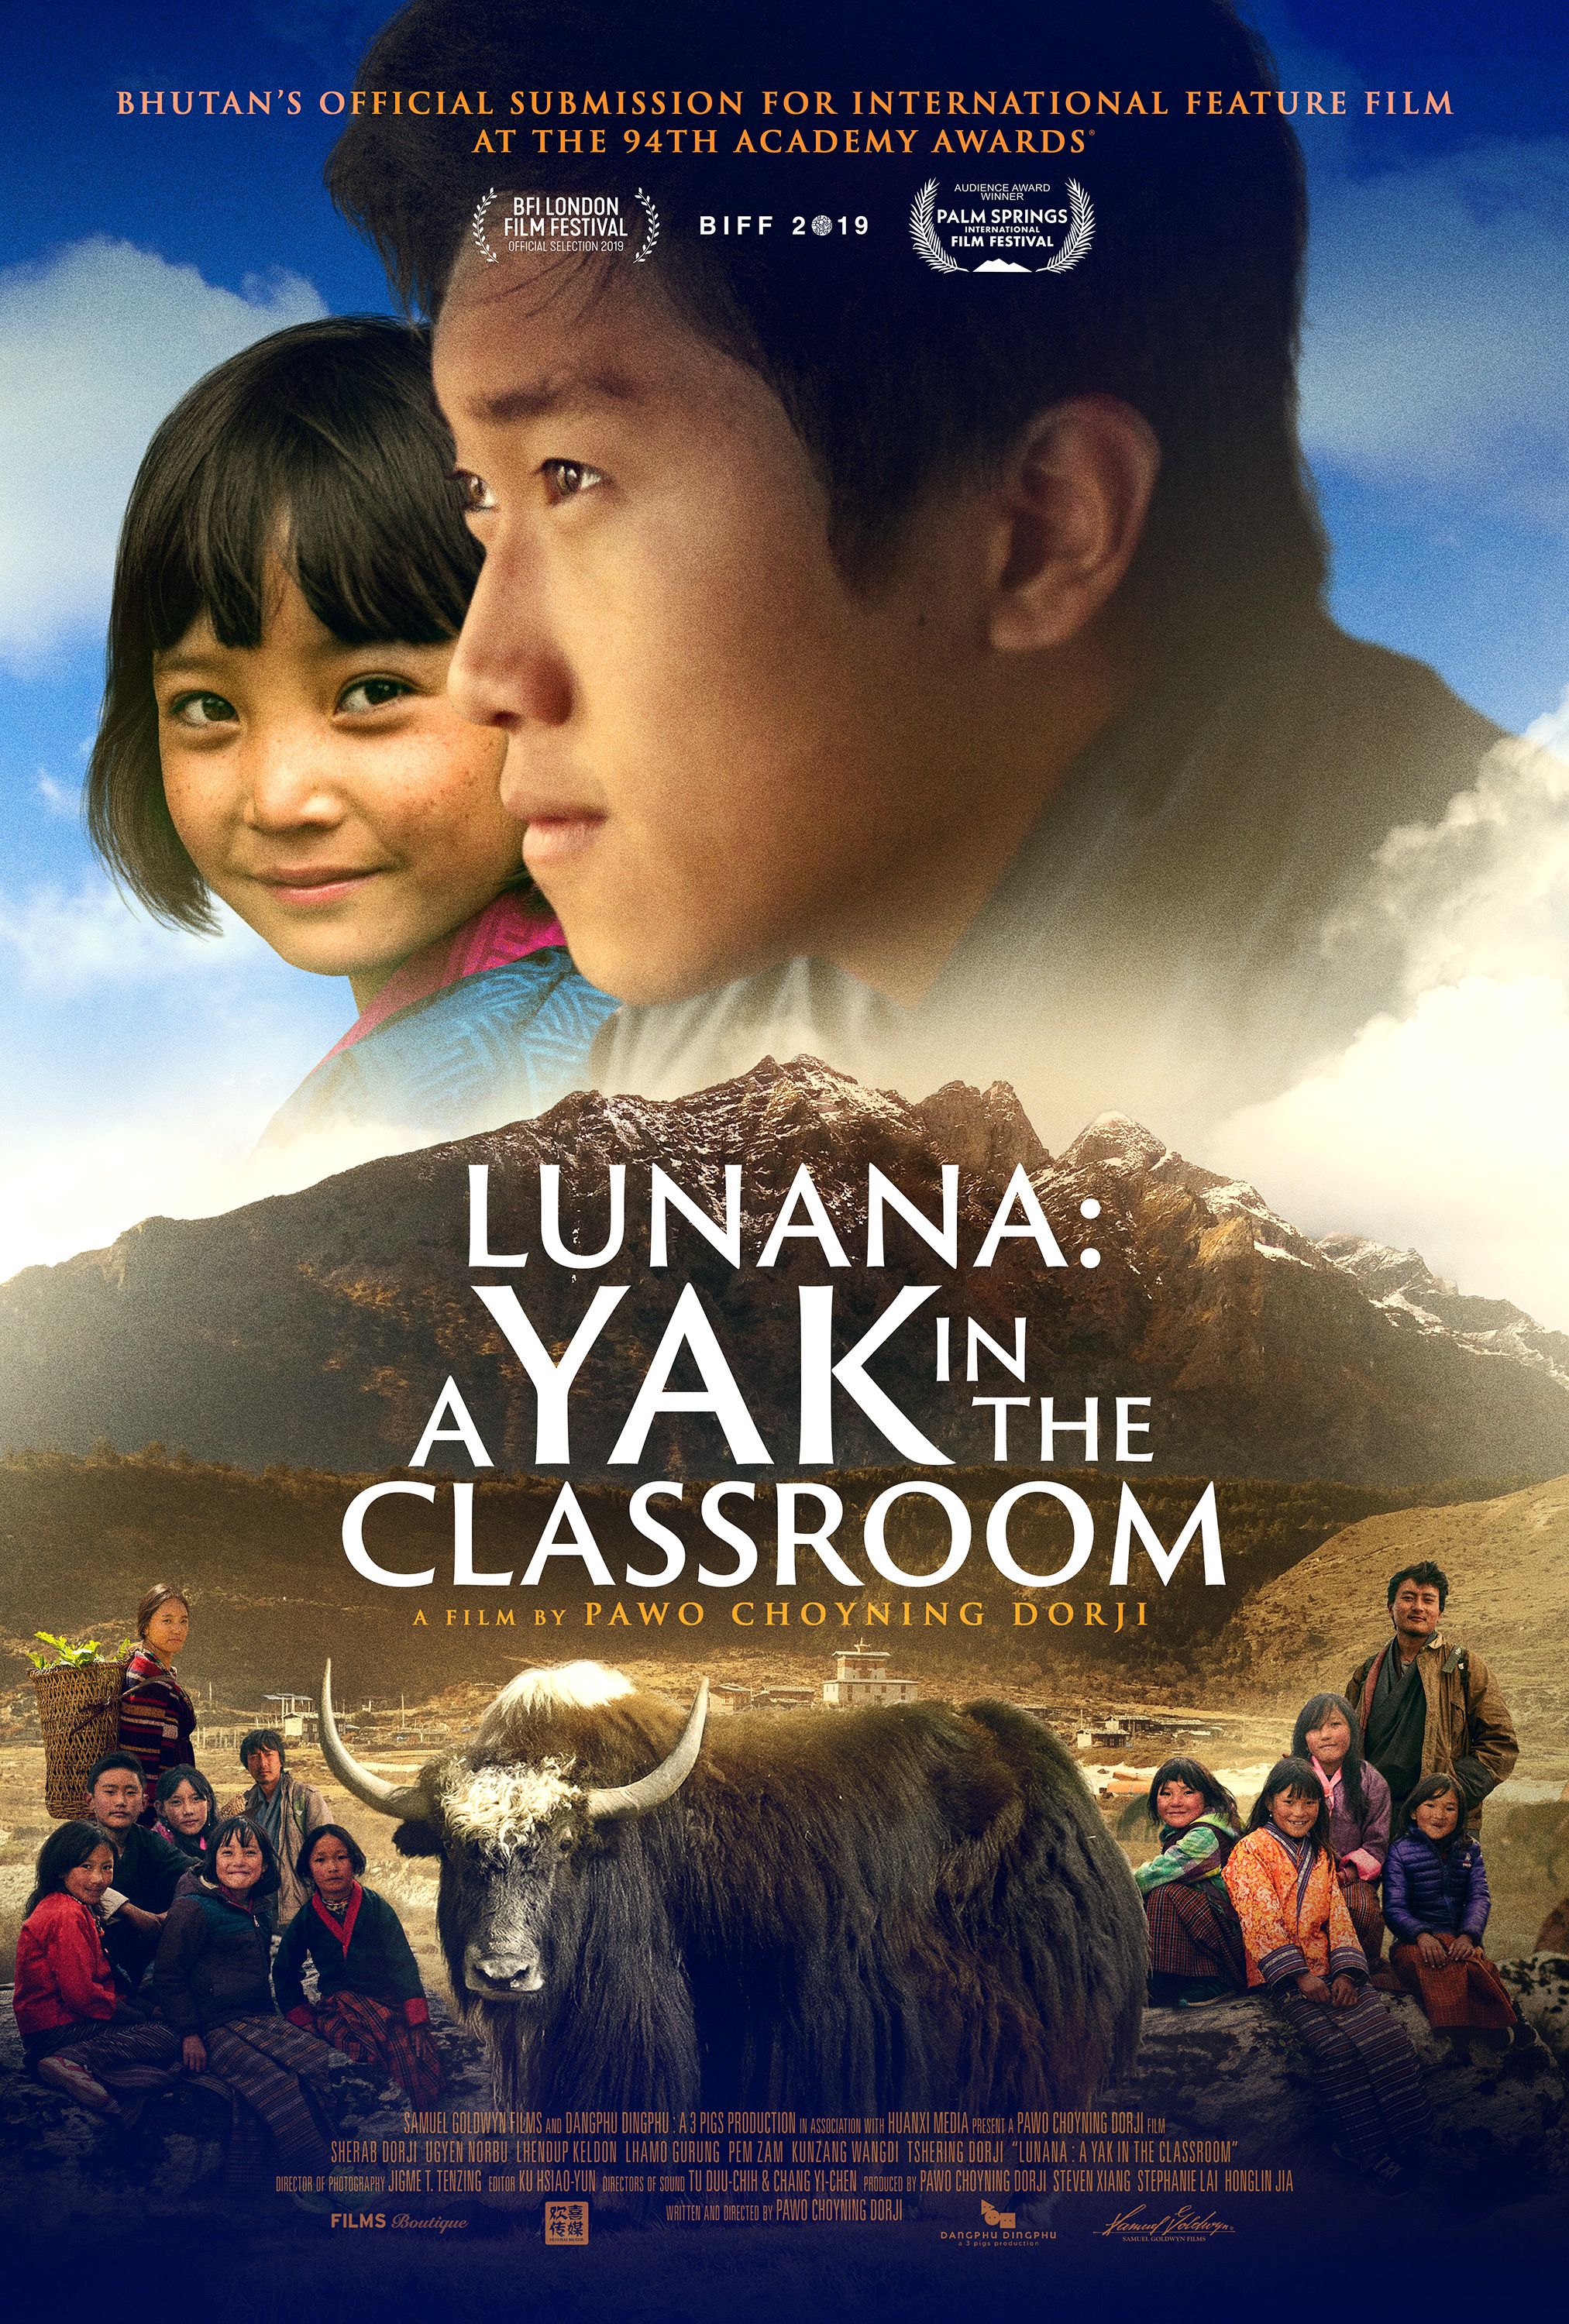 Lunana A Yak in the Classroom (2019) Hindi Dubbed Movie